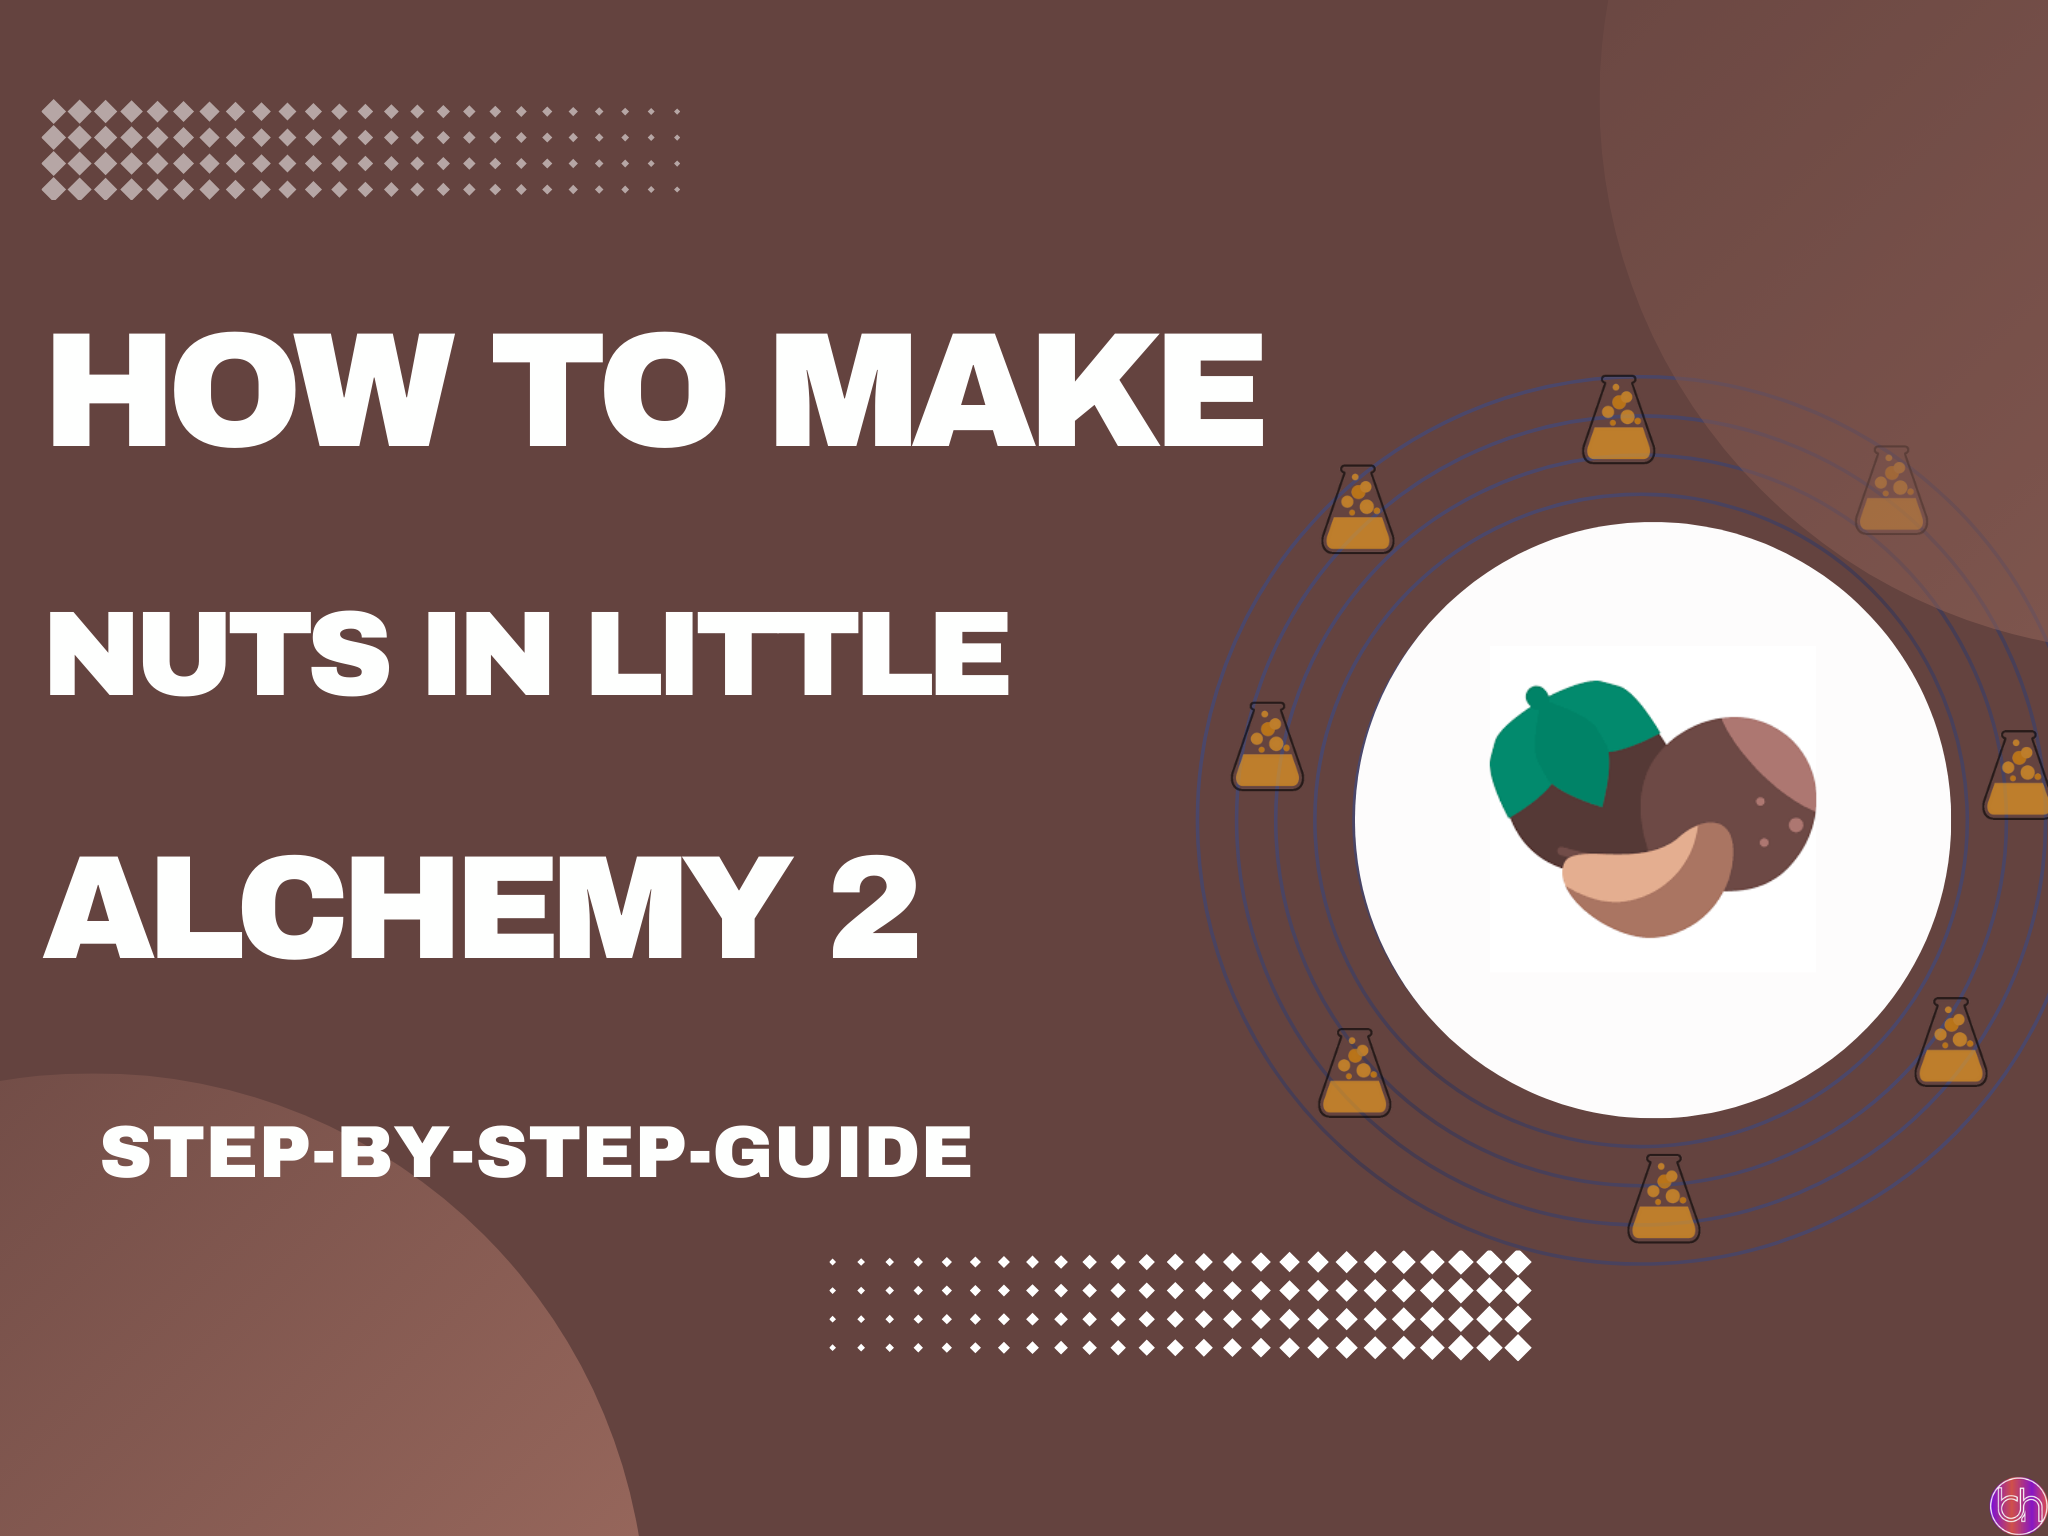 How to make Nuts in little alchemy 2